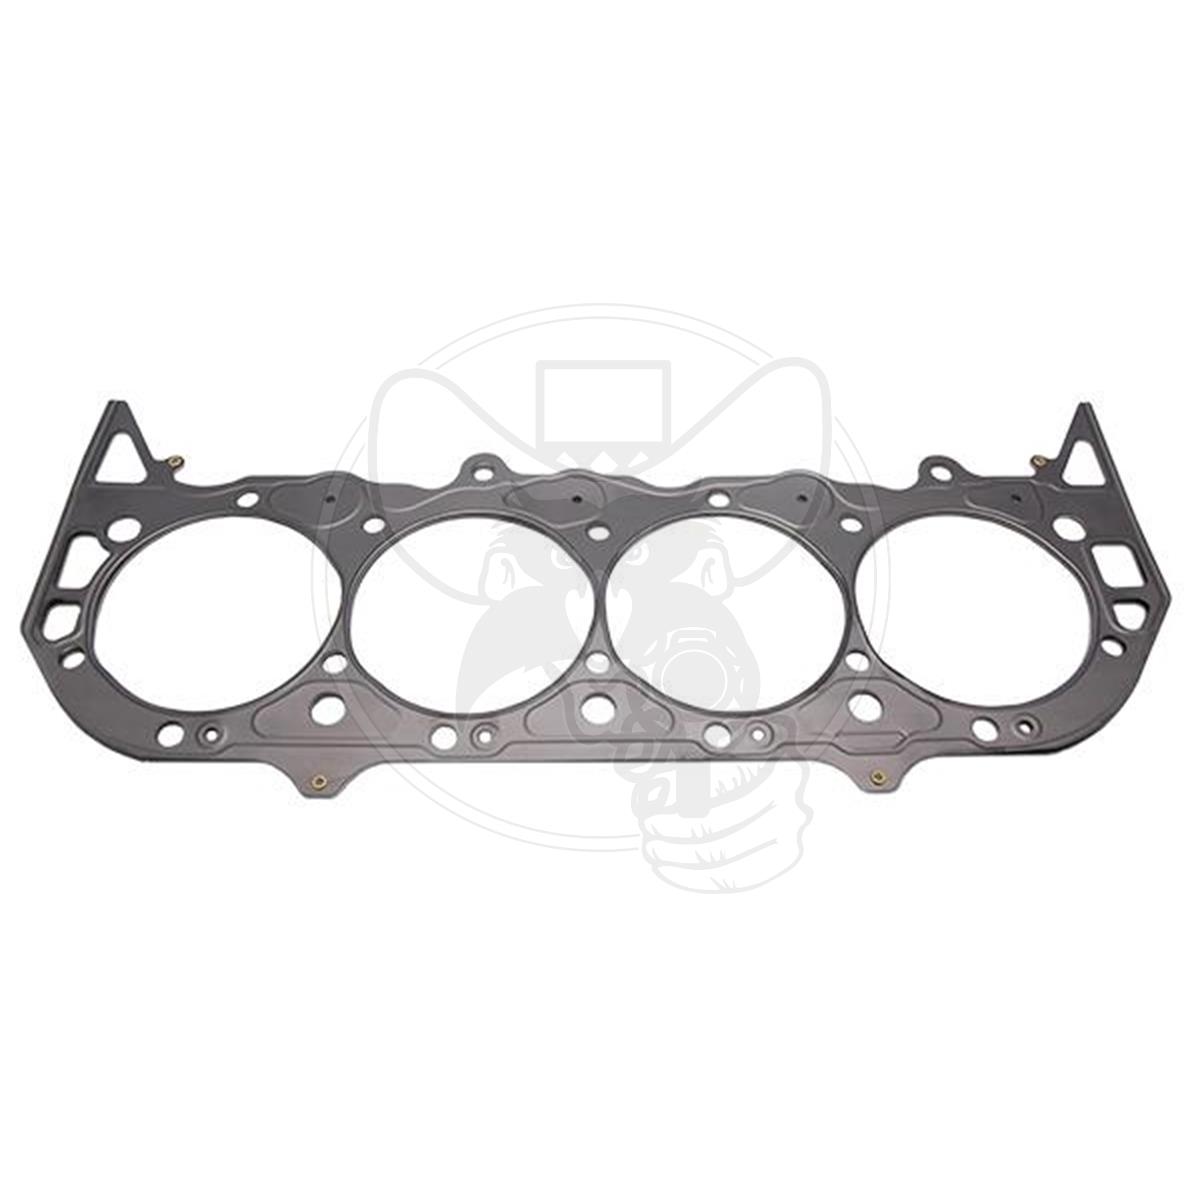 Cometic Gasket C5333-040 MLS .040 Thickness 4.540 Head Gasket for Big Block Chevy 